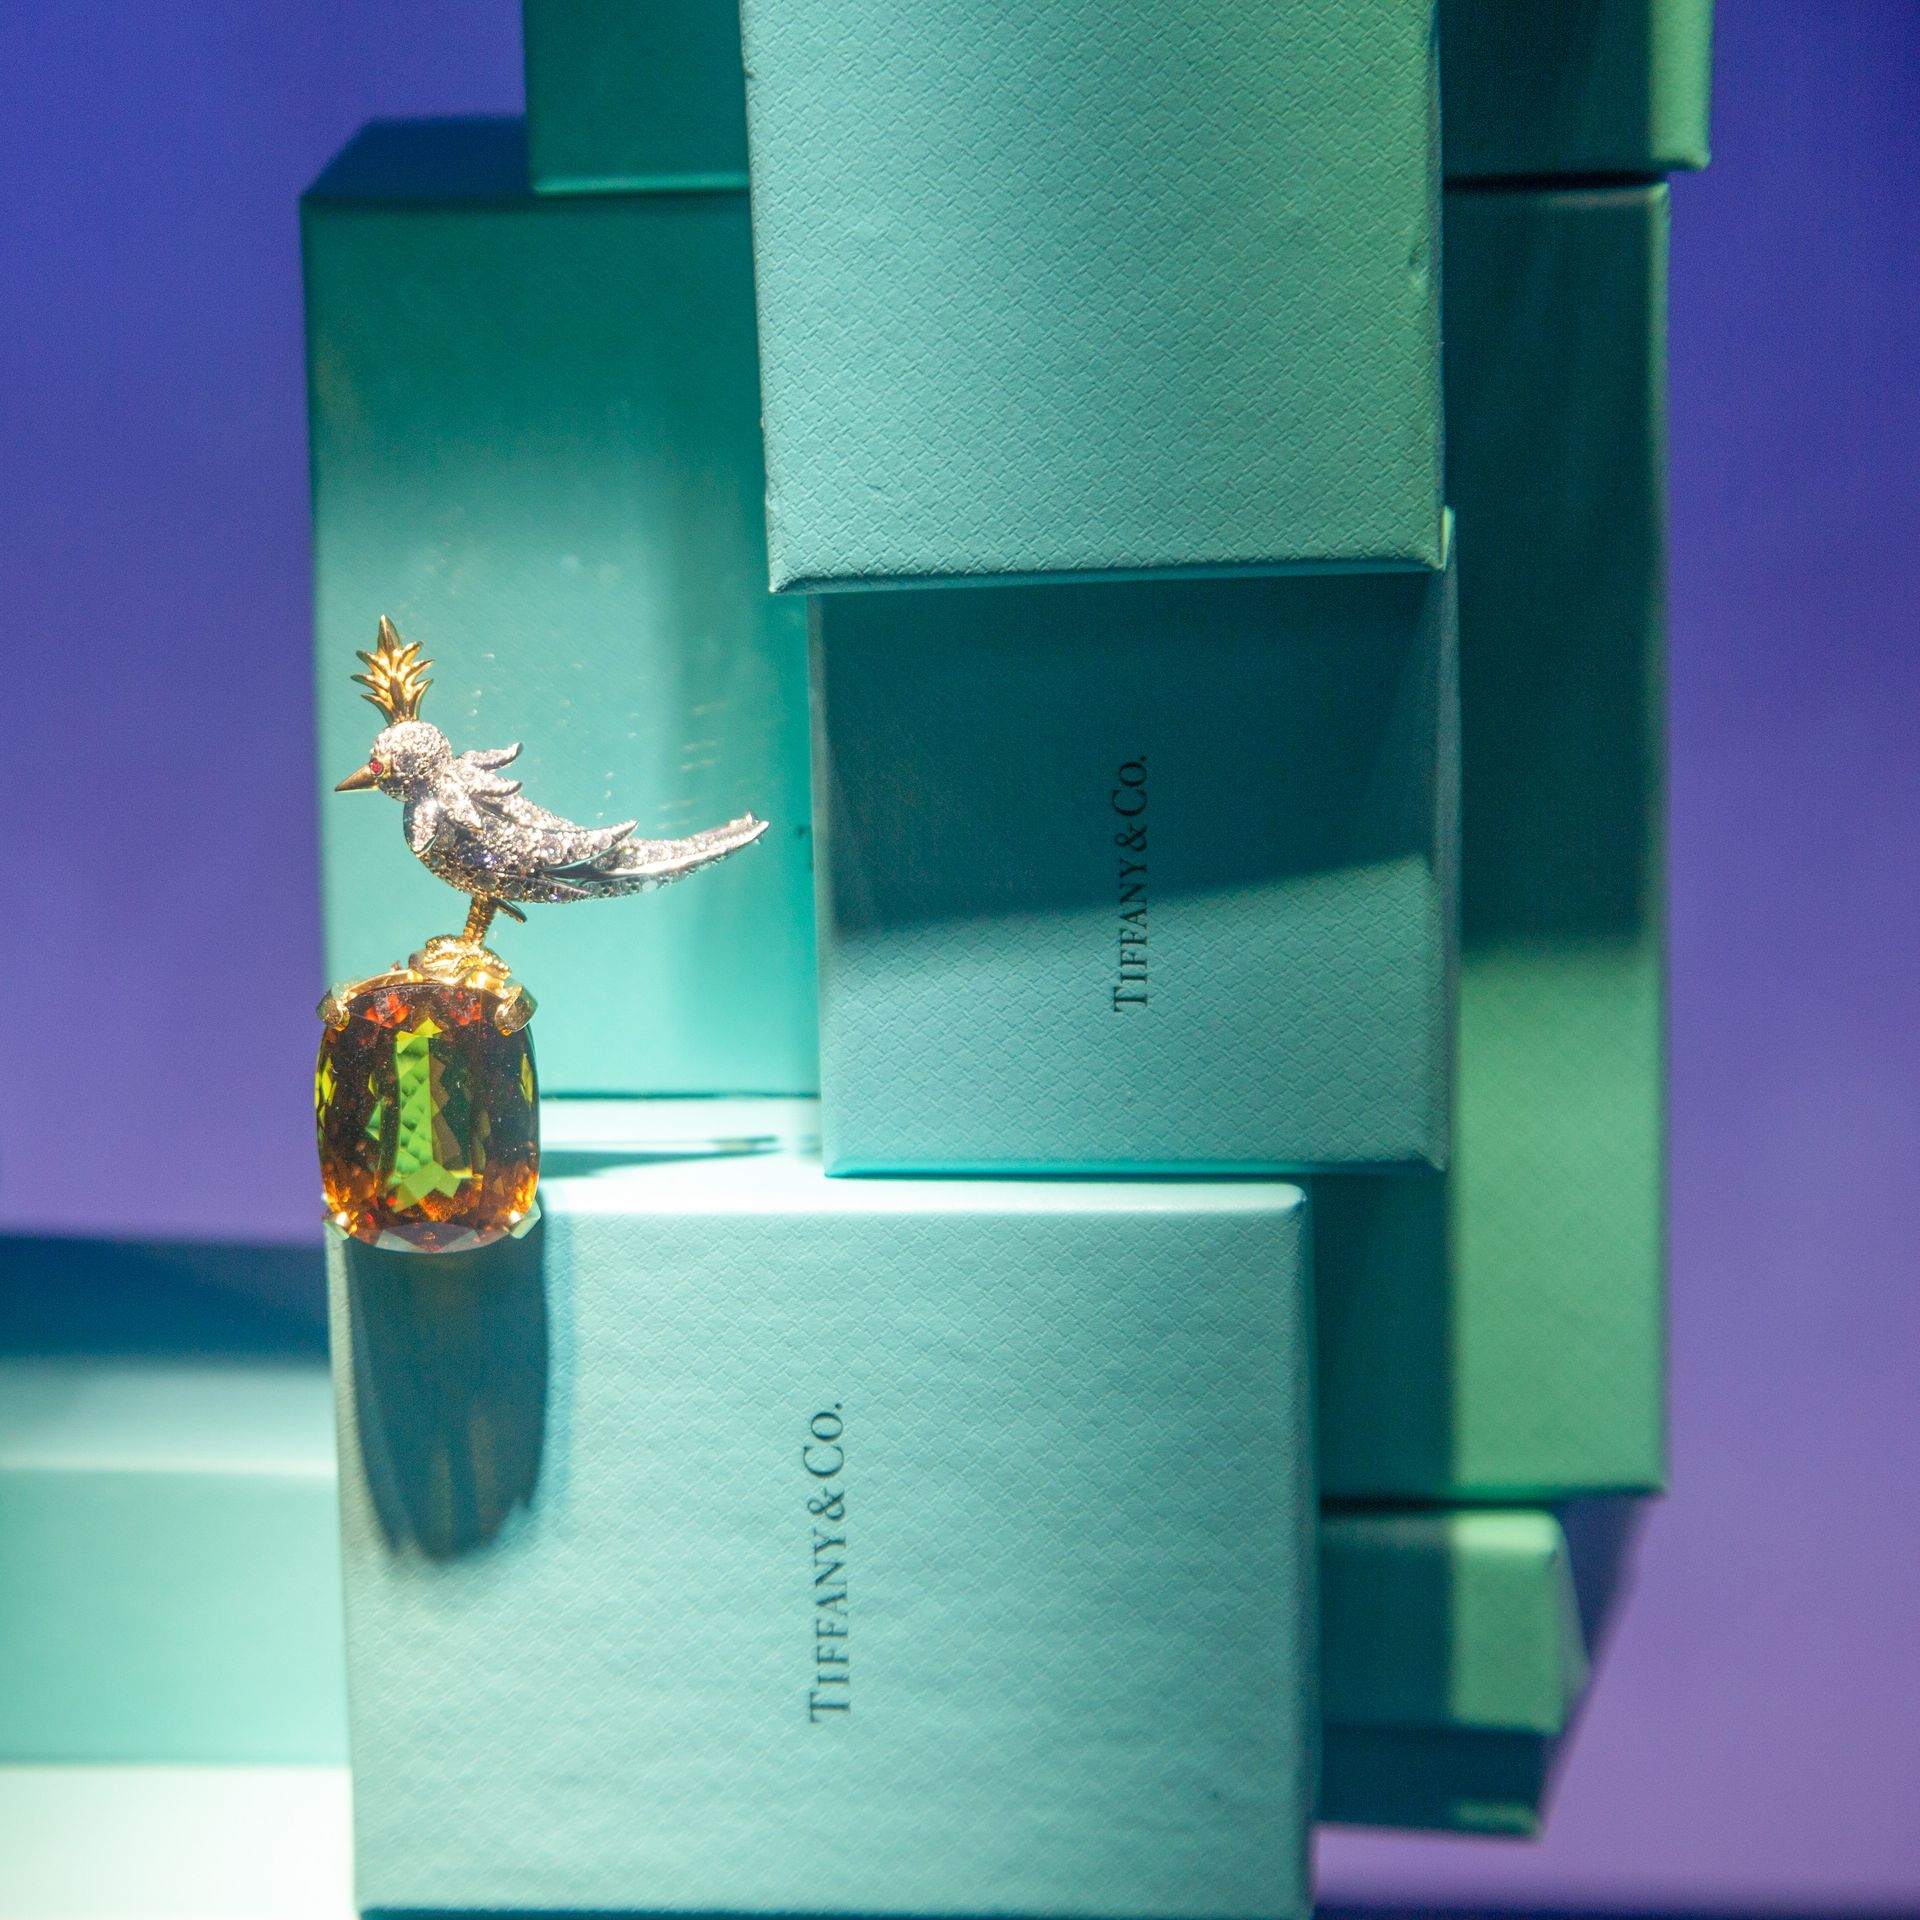 Report: LVMH agrees to buy Tiffany & Co. for $18.5 billion